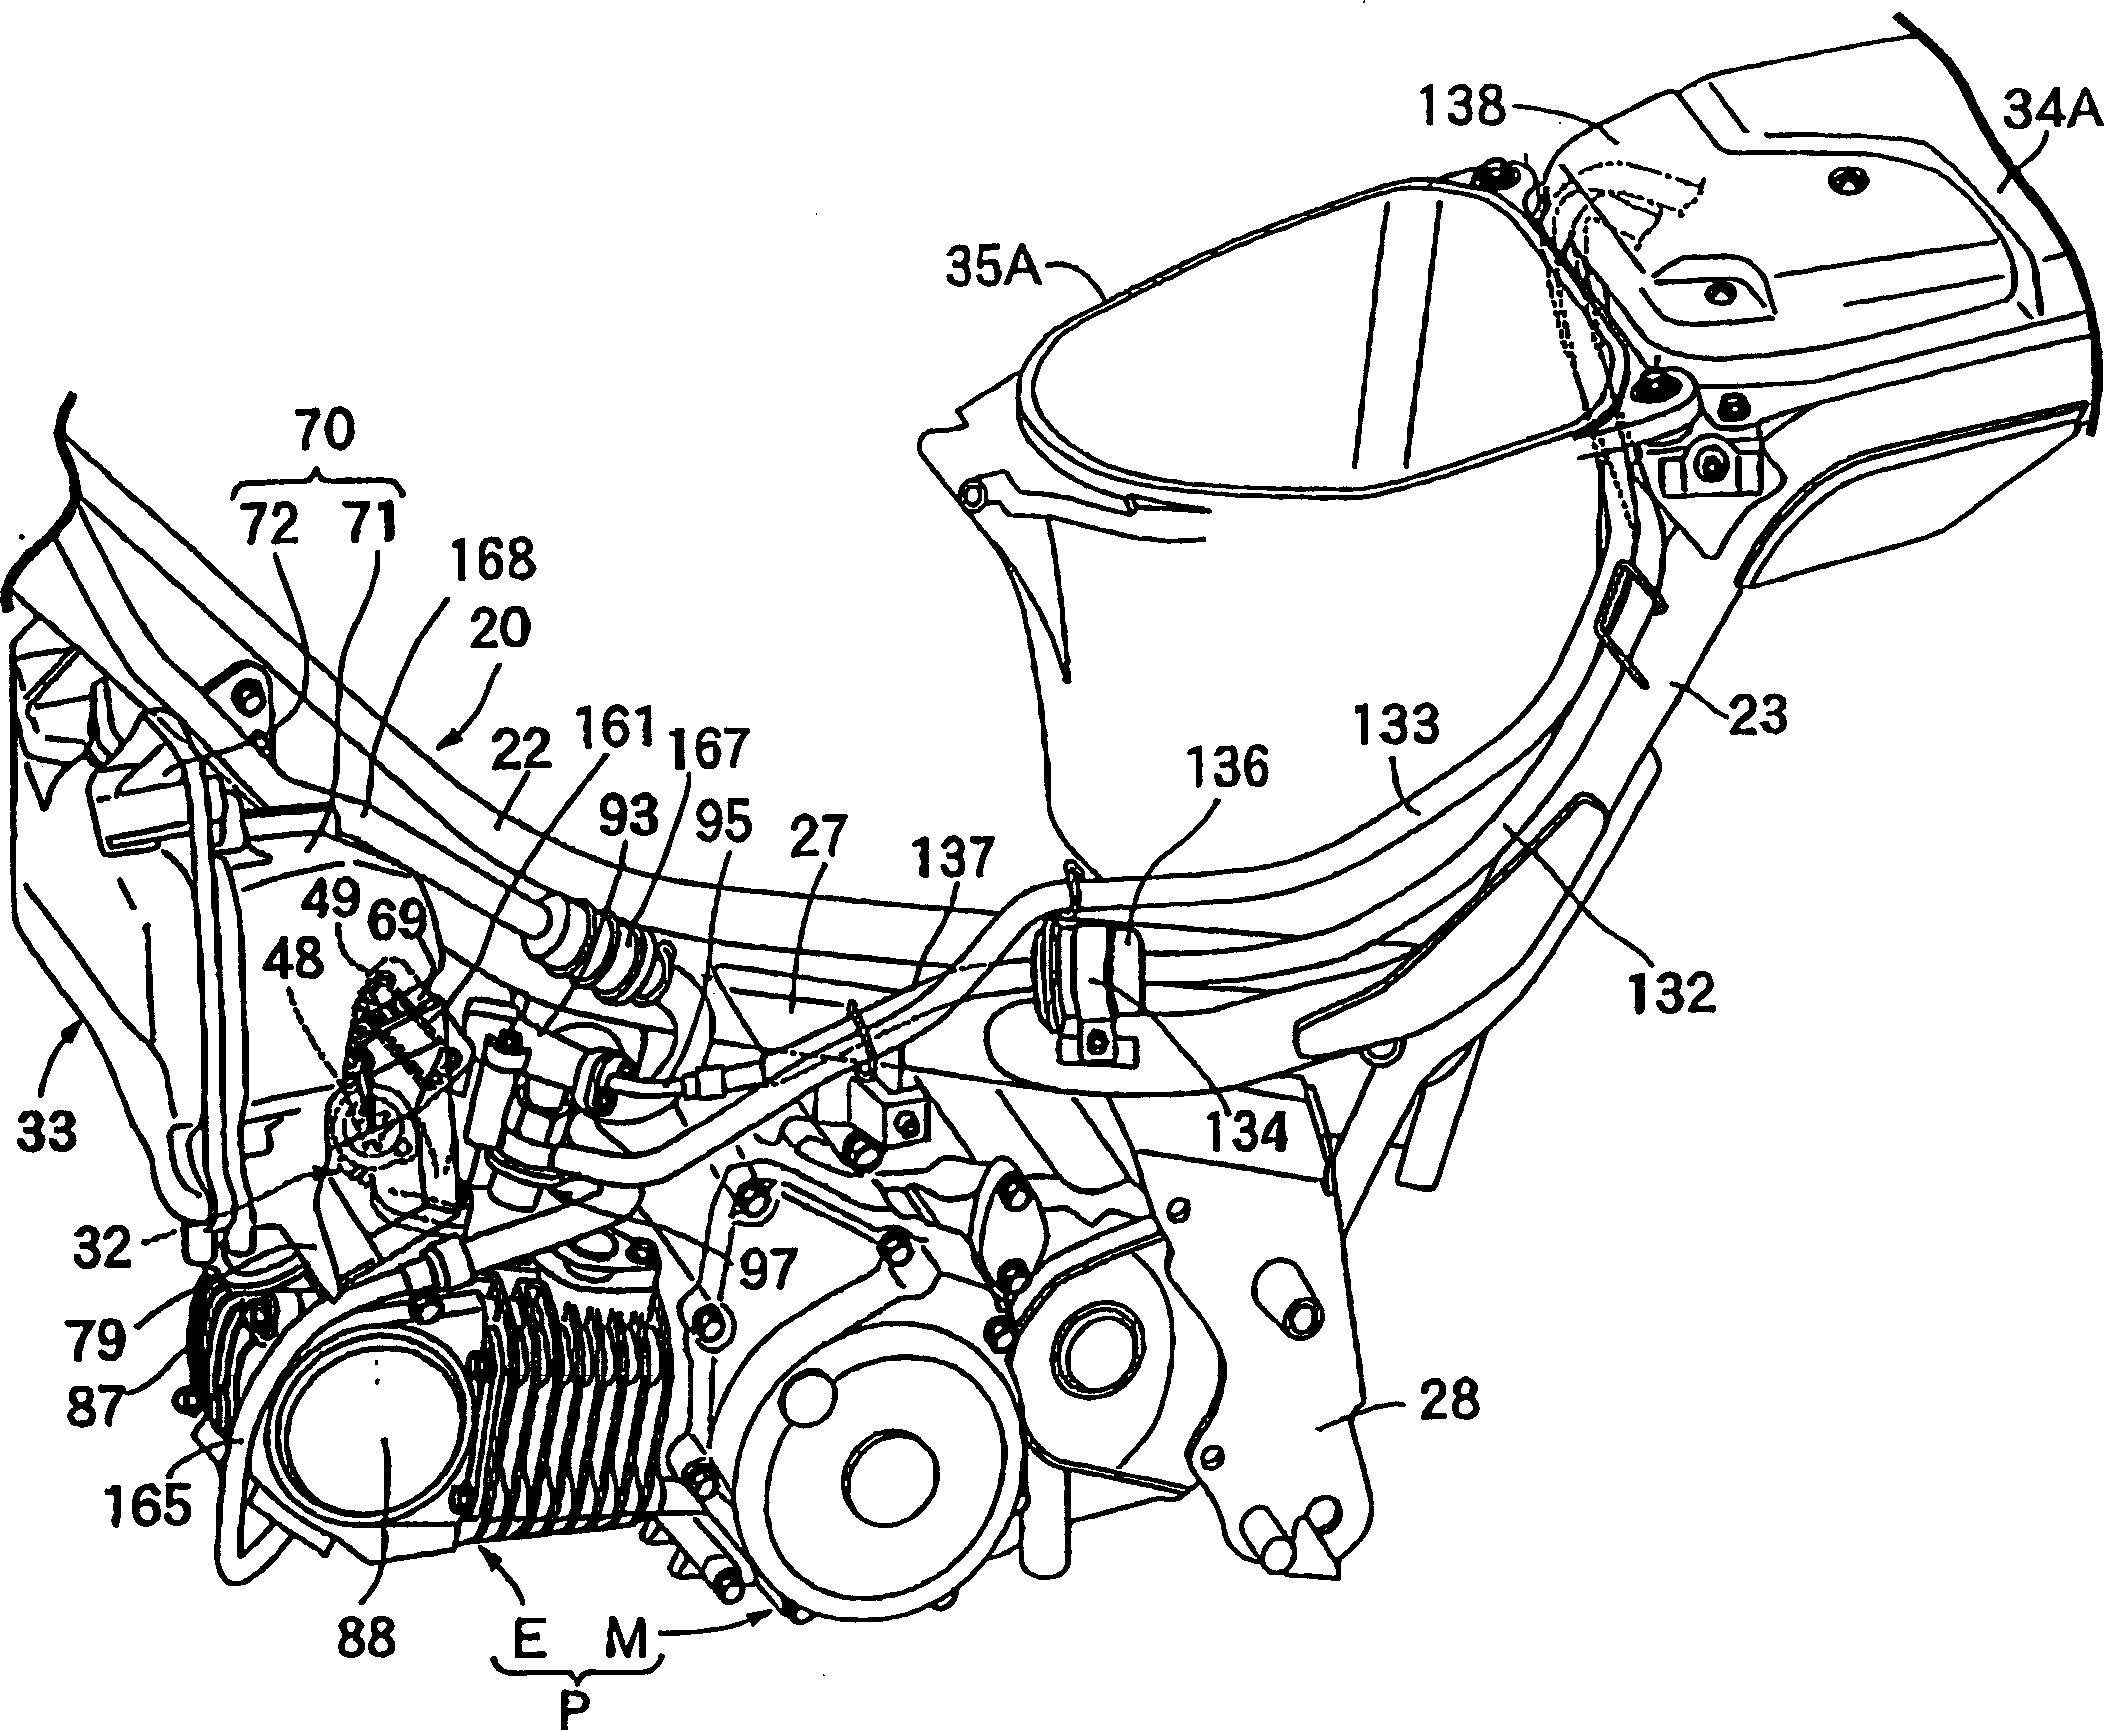 Structure for disposing fuel system in motor